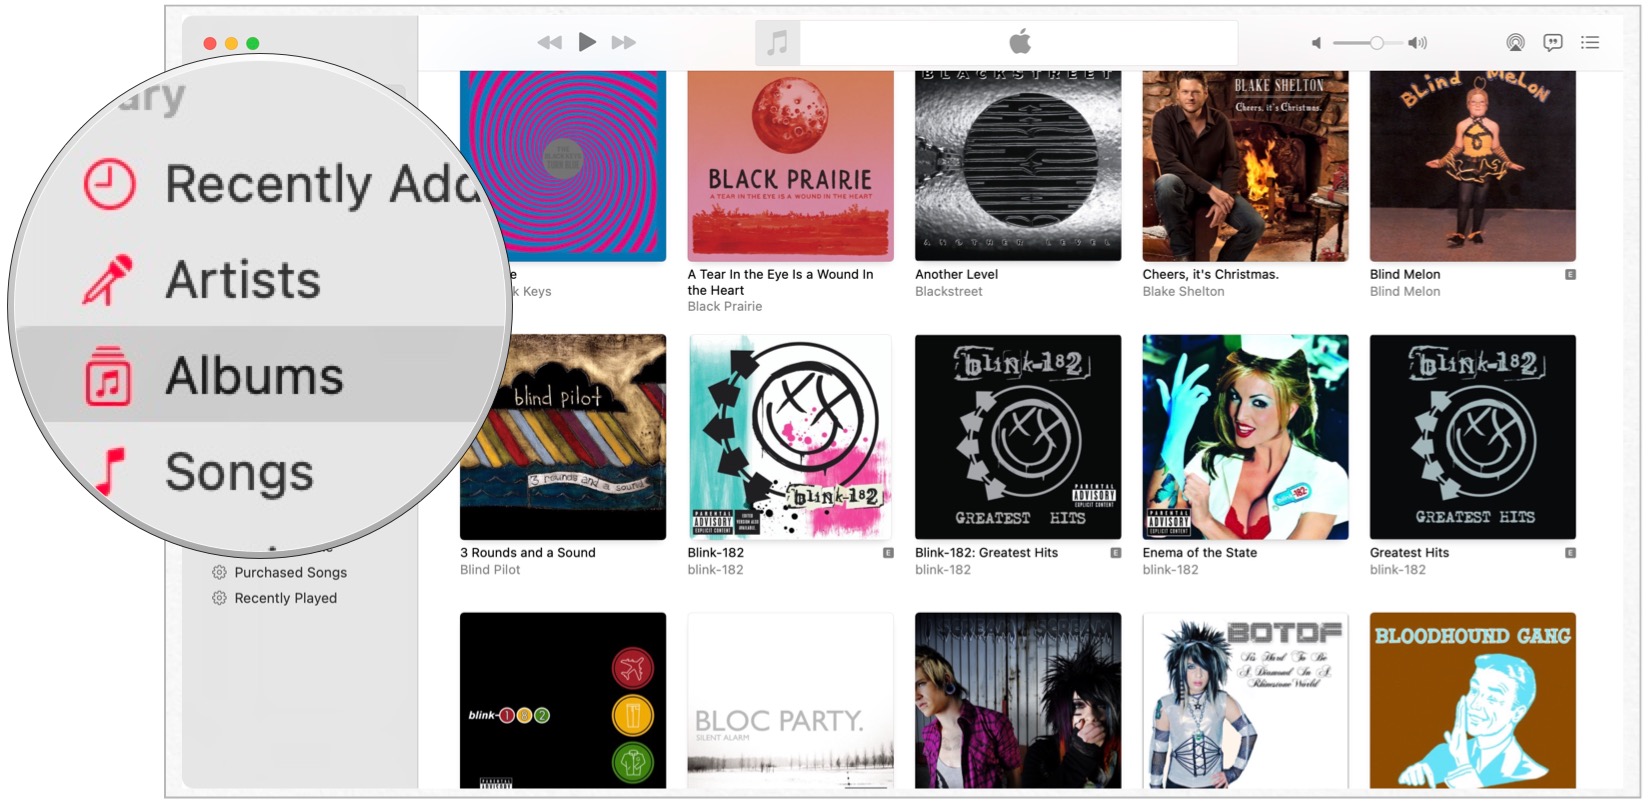 To sort albums on your Mac, open the Music app from the Mac dock, then click Albums under Library.